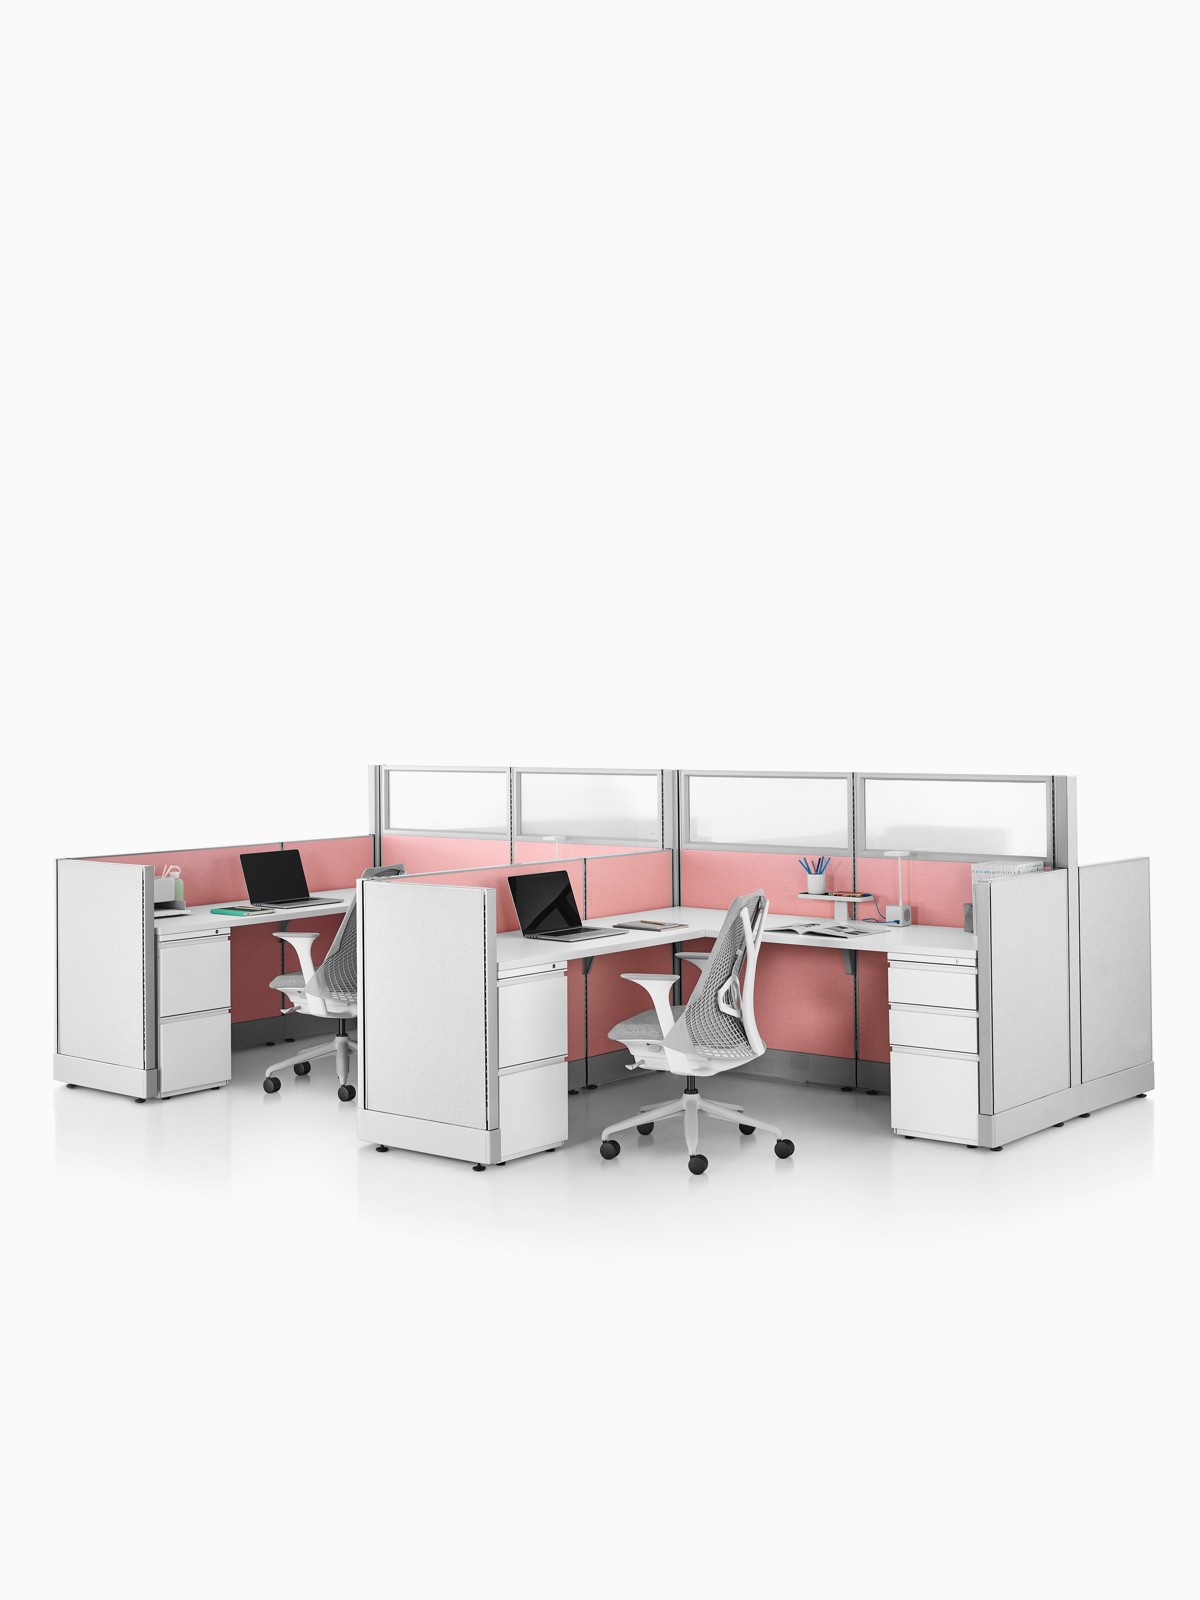 Two Action Office System open workstations with gray Sayl office chairs.